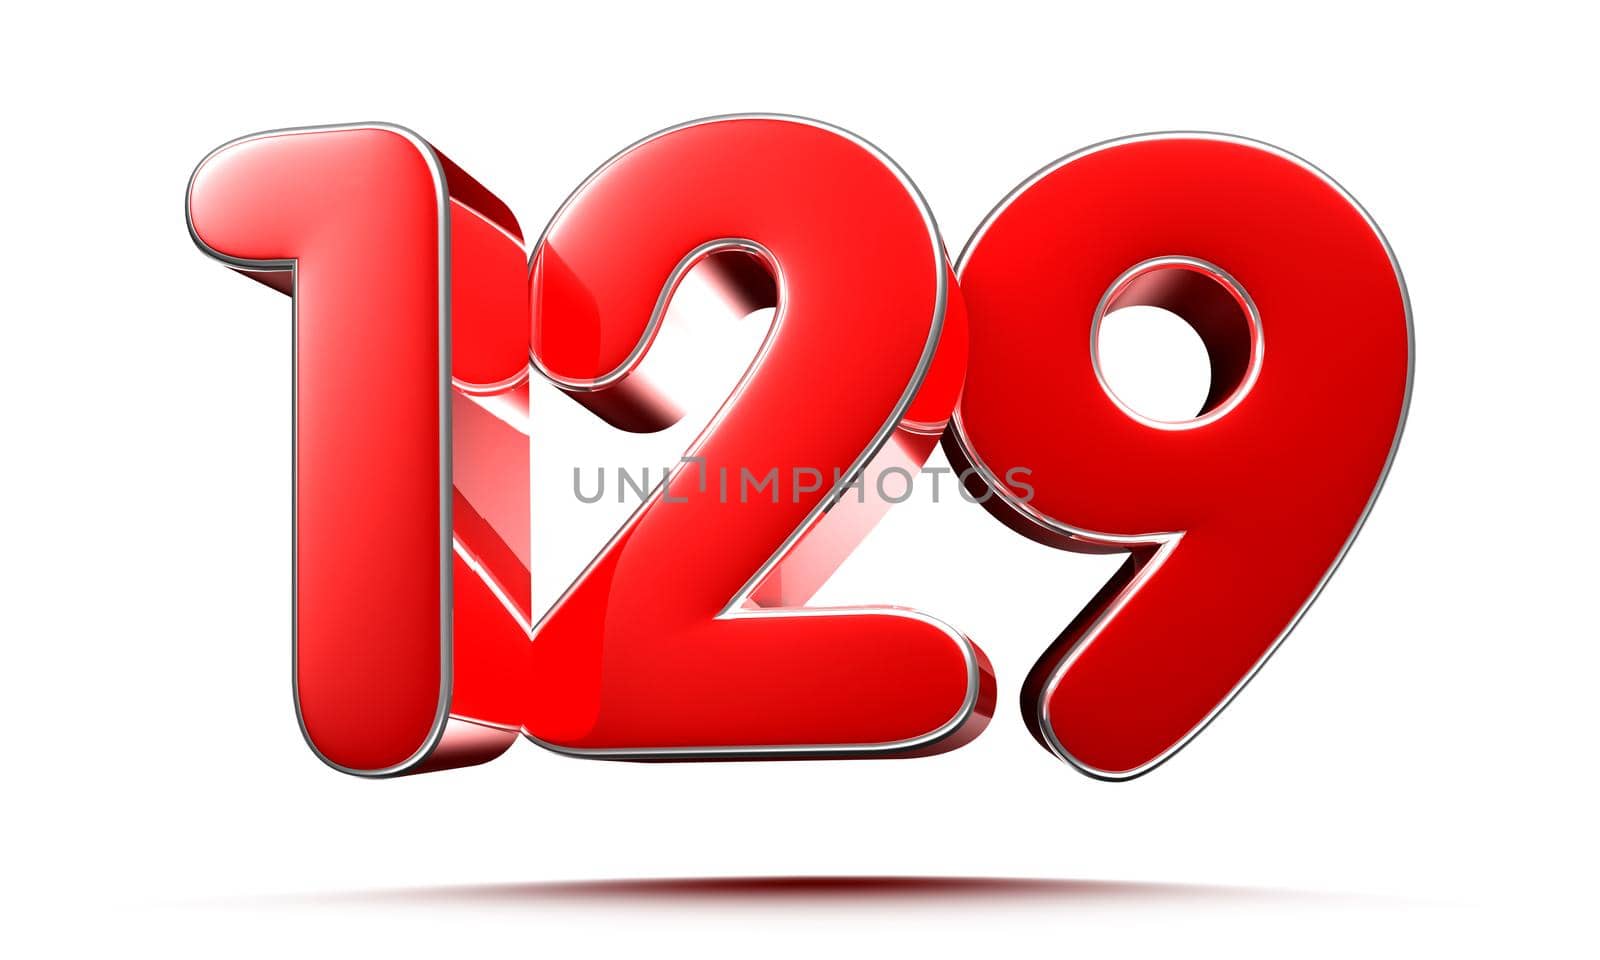 Rounded red numbers 129 on white background 3D illustration with clipping path